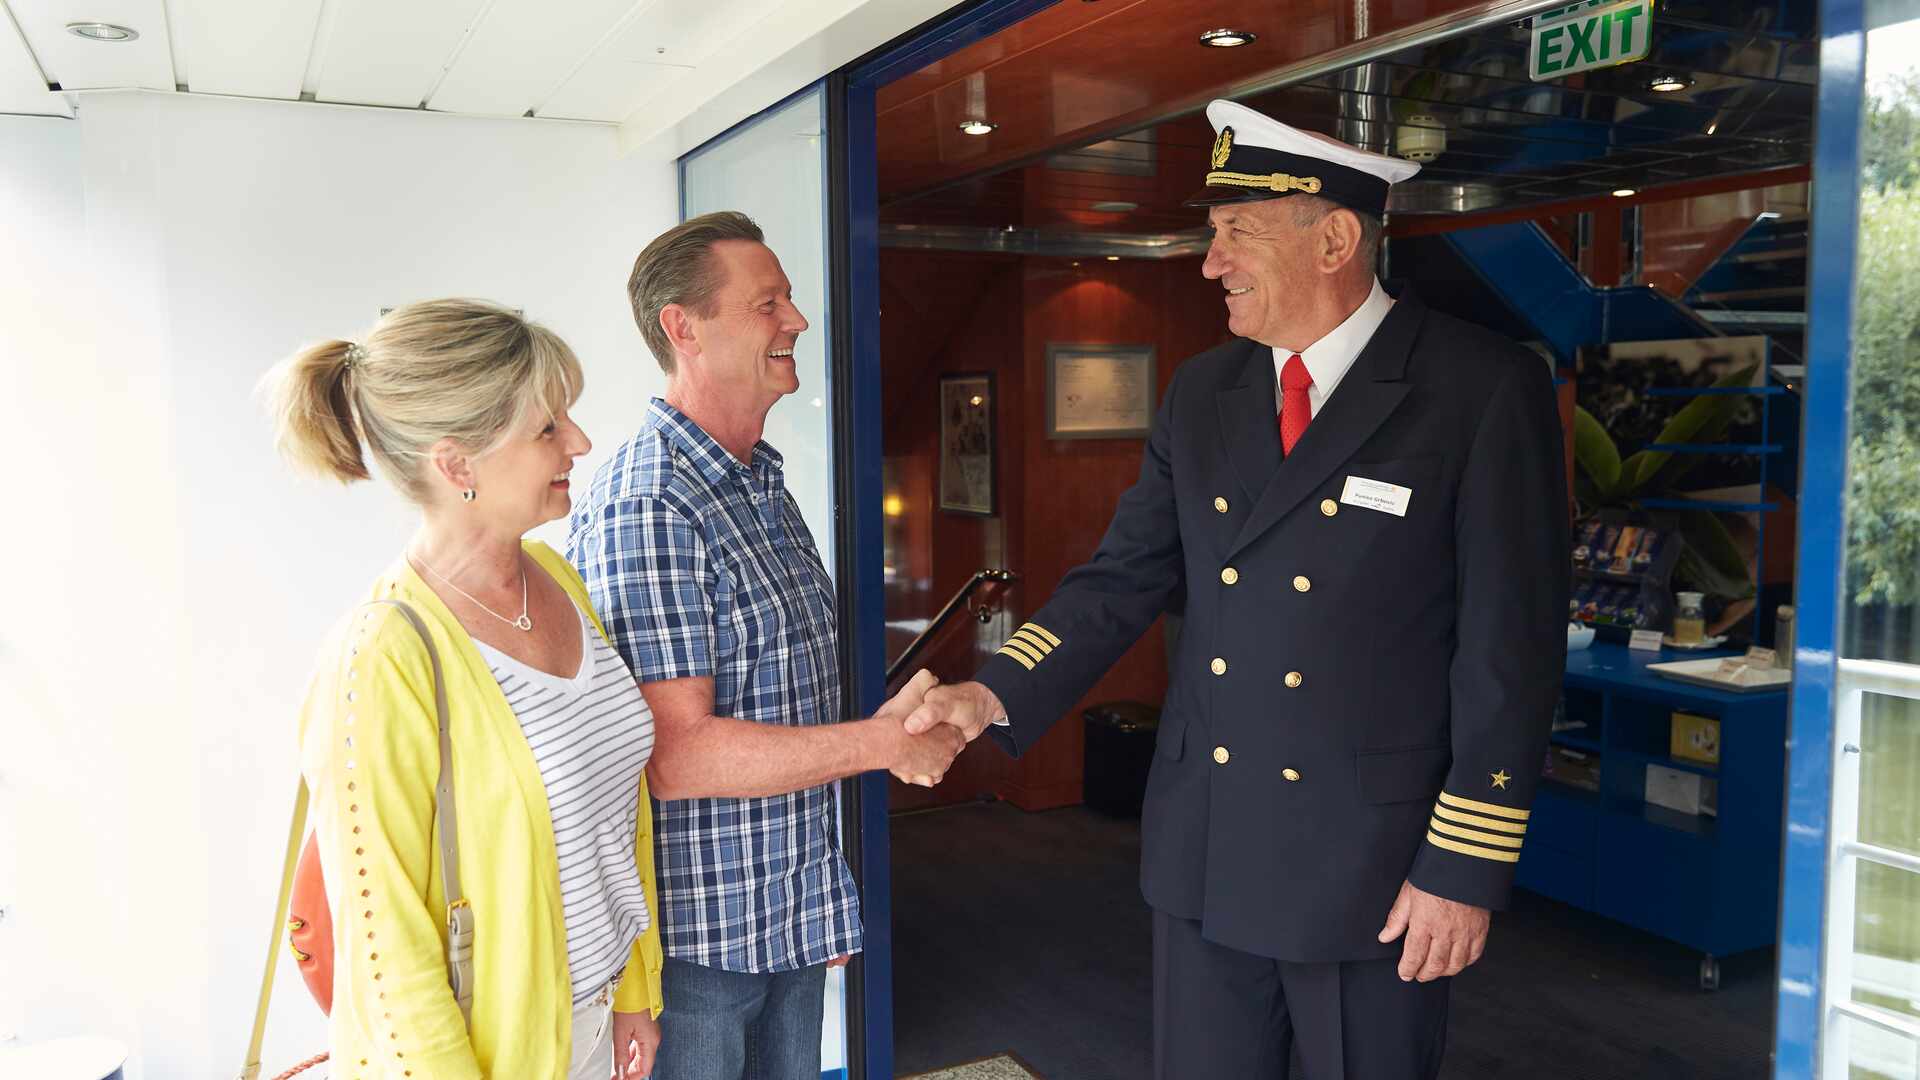 View of passengers meeting Captain on Contemporary ship